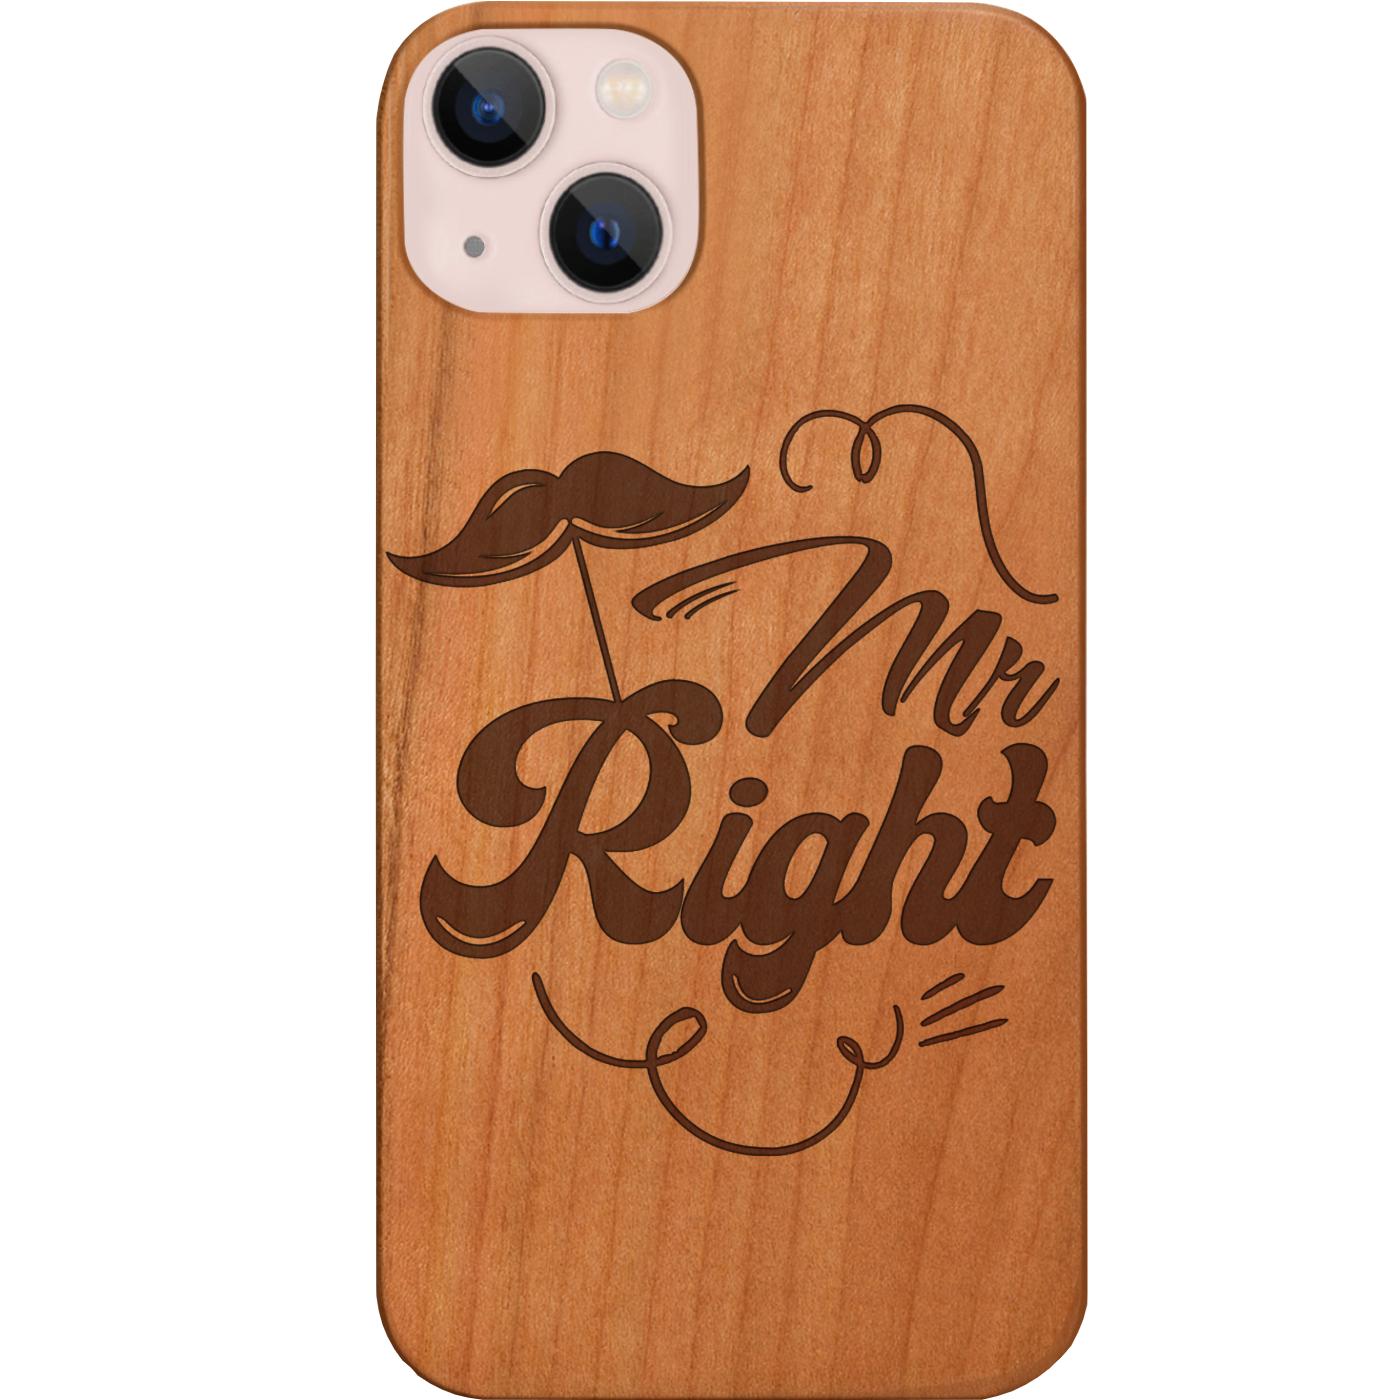 Mr Right - Engraved Phone Case